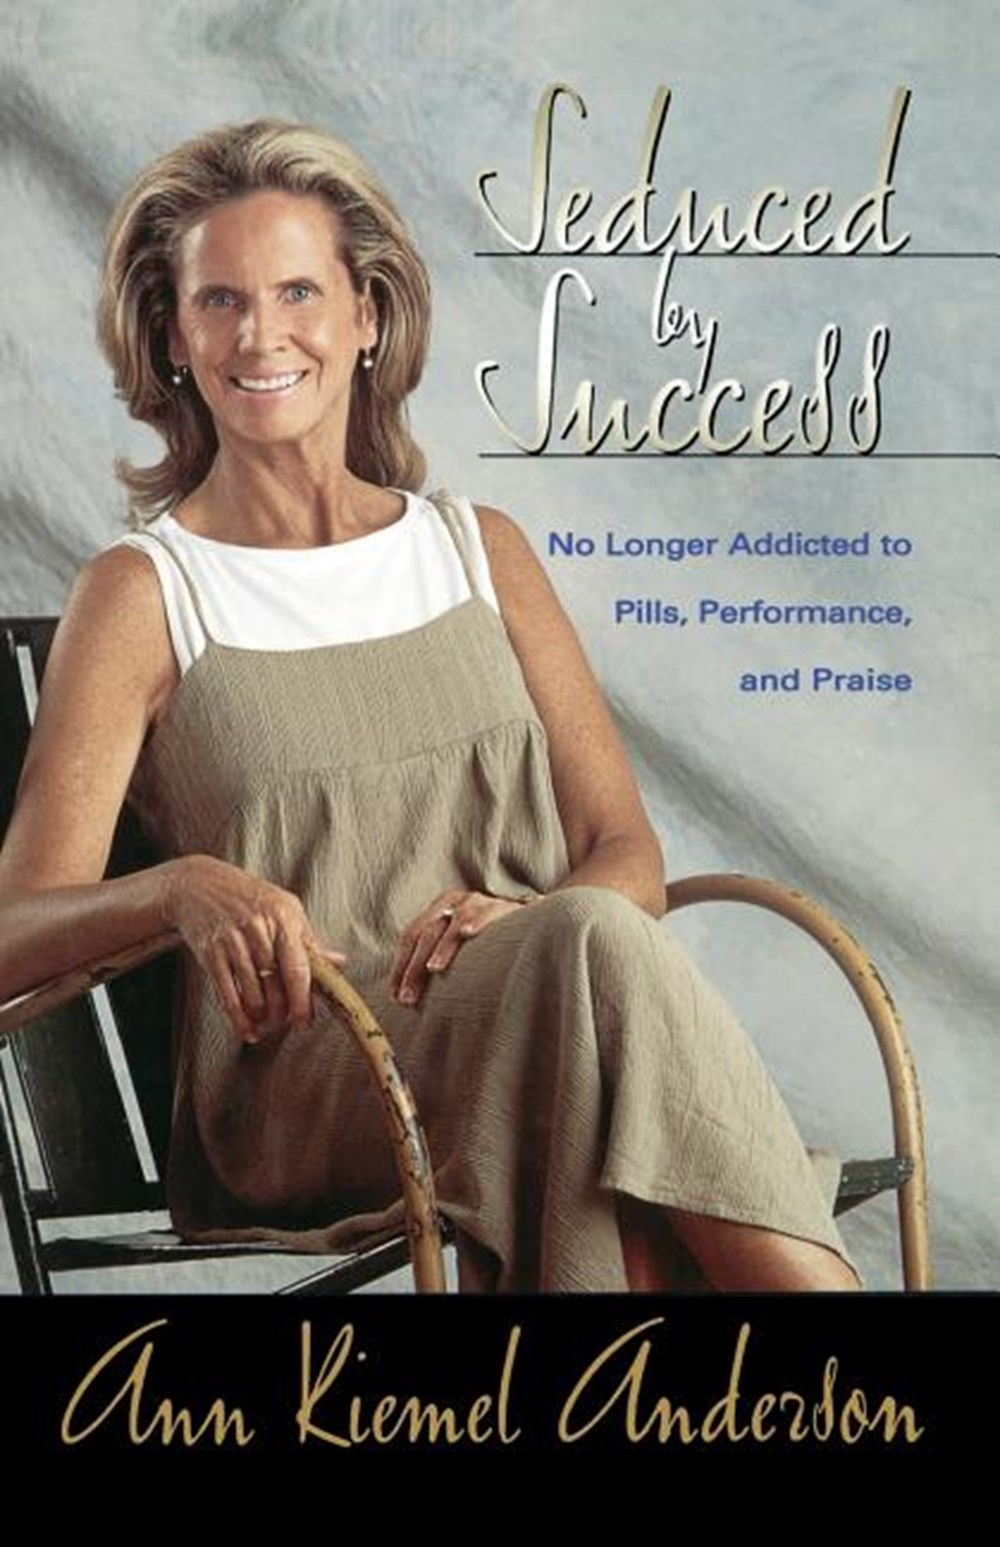 Seduced by Success: No Longer Addicted to Pills, Performance and Praise